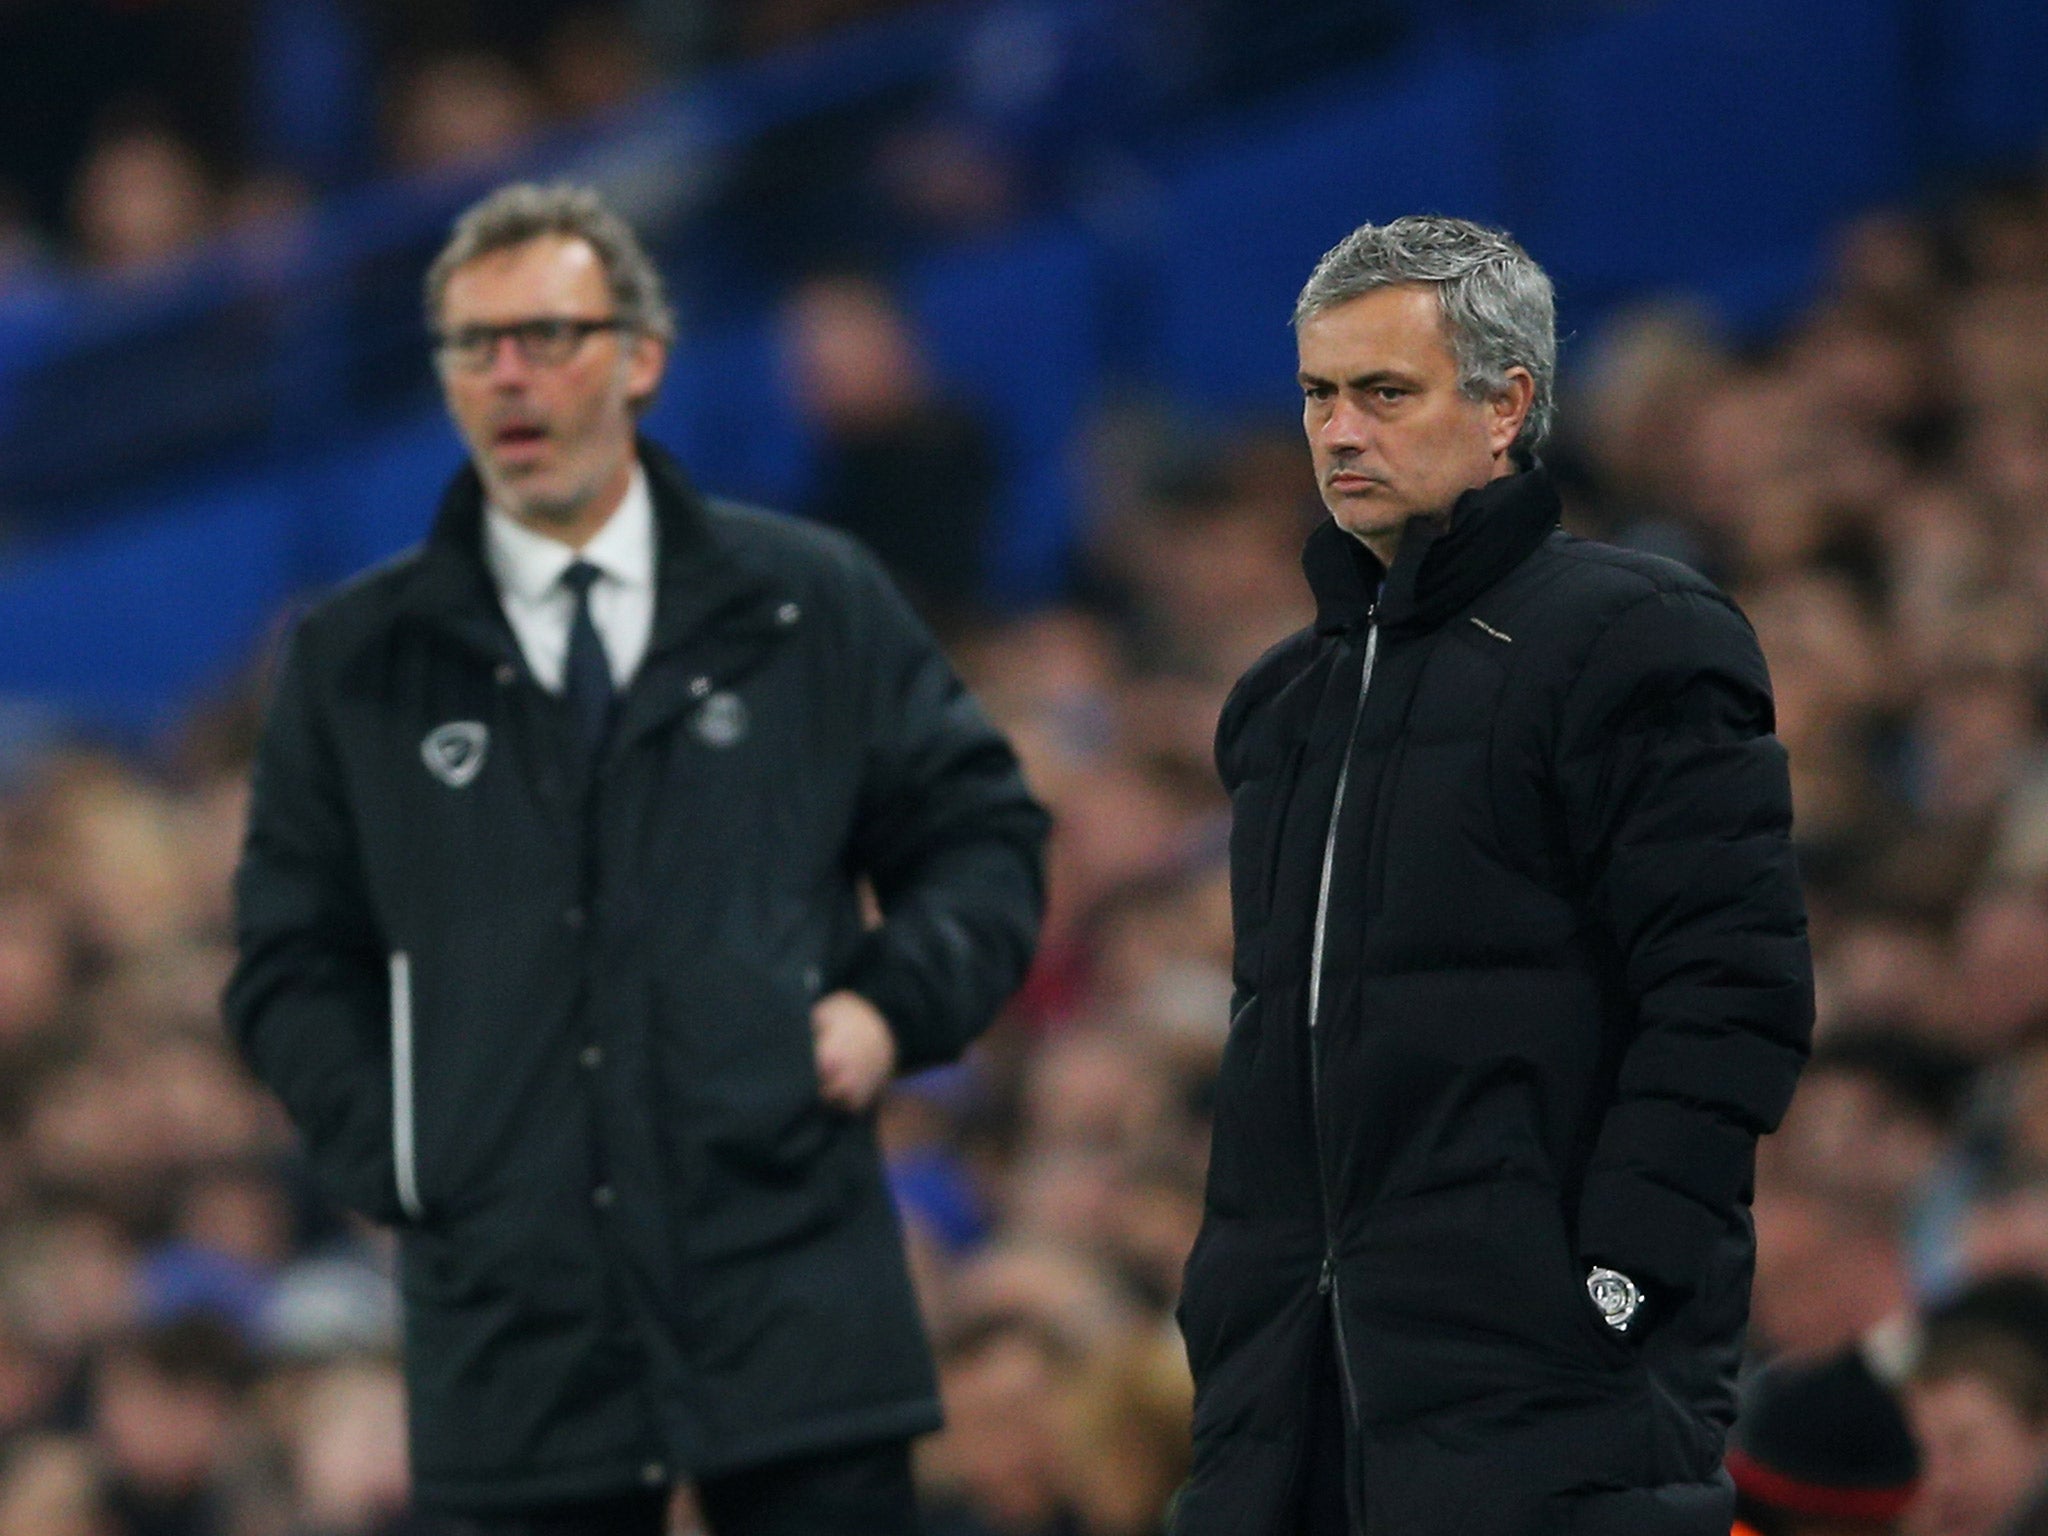 Jose Mourinho is reported to be in talks about replacing Laurent Blanc at PSG